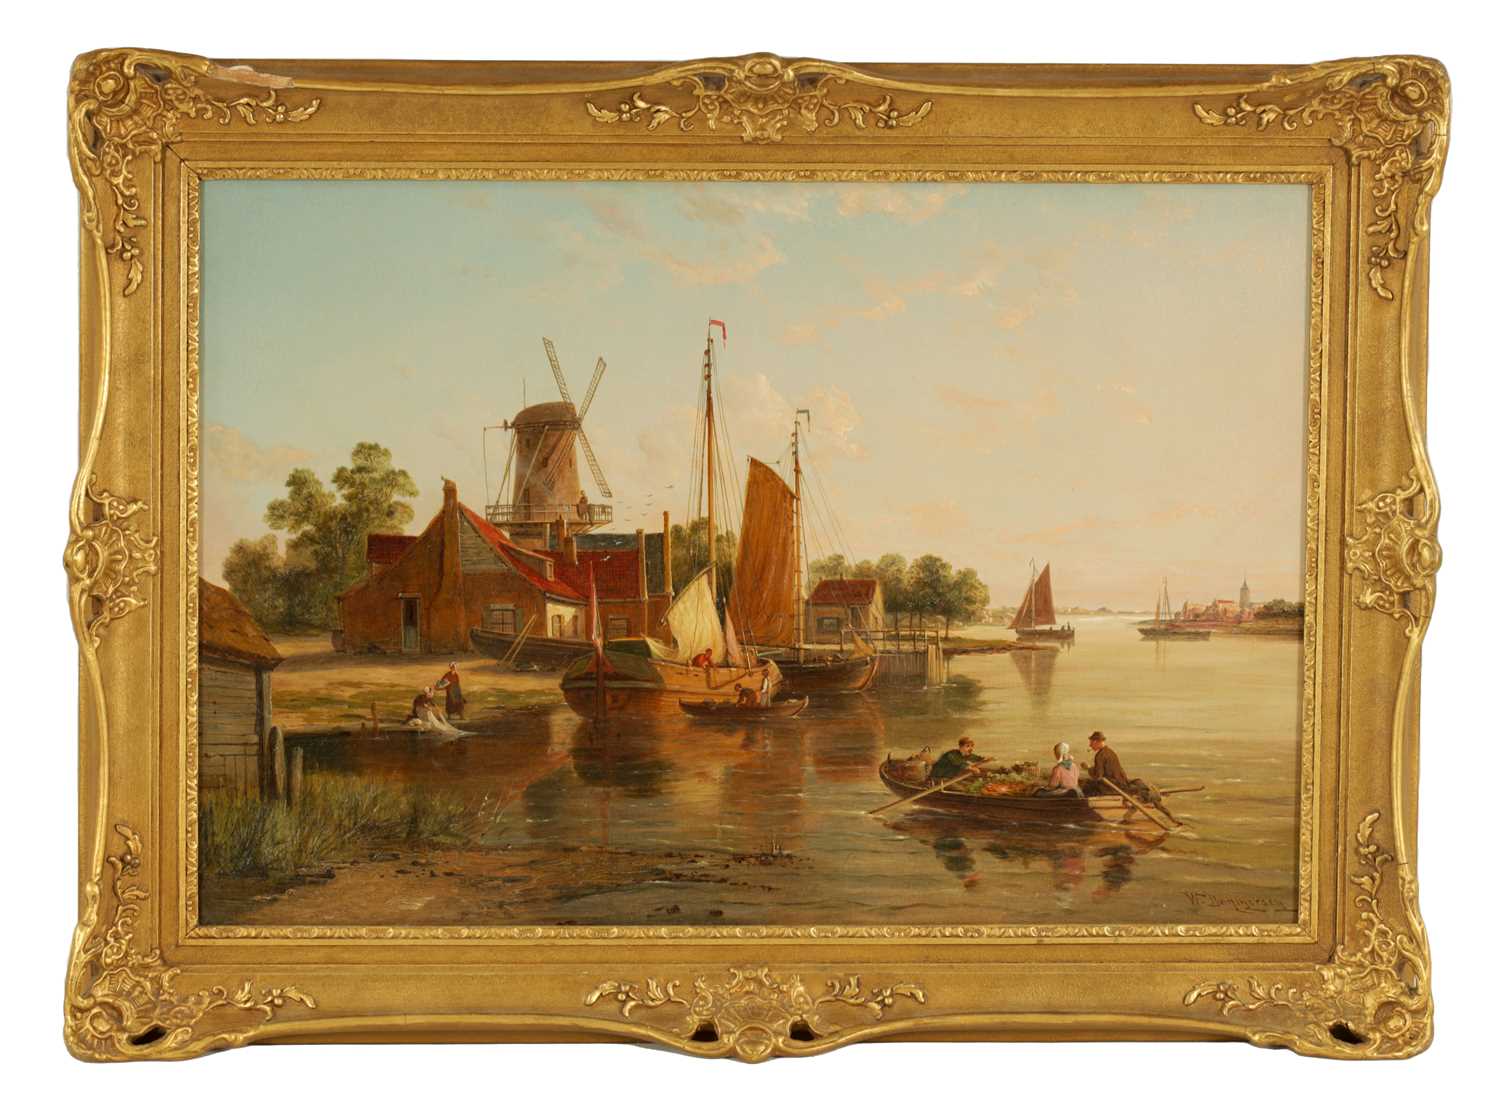 Lot 641 - WILLIAM RAYMOND DOMMERSEN (1850-1927) A LATE 19TH CENTURY OIL ON CANVAS